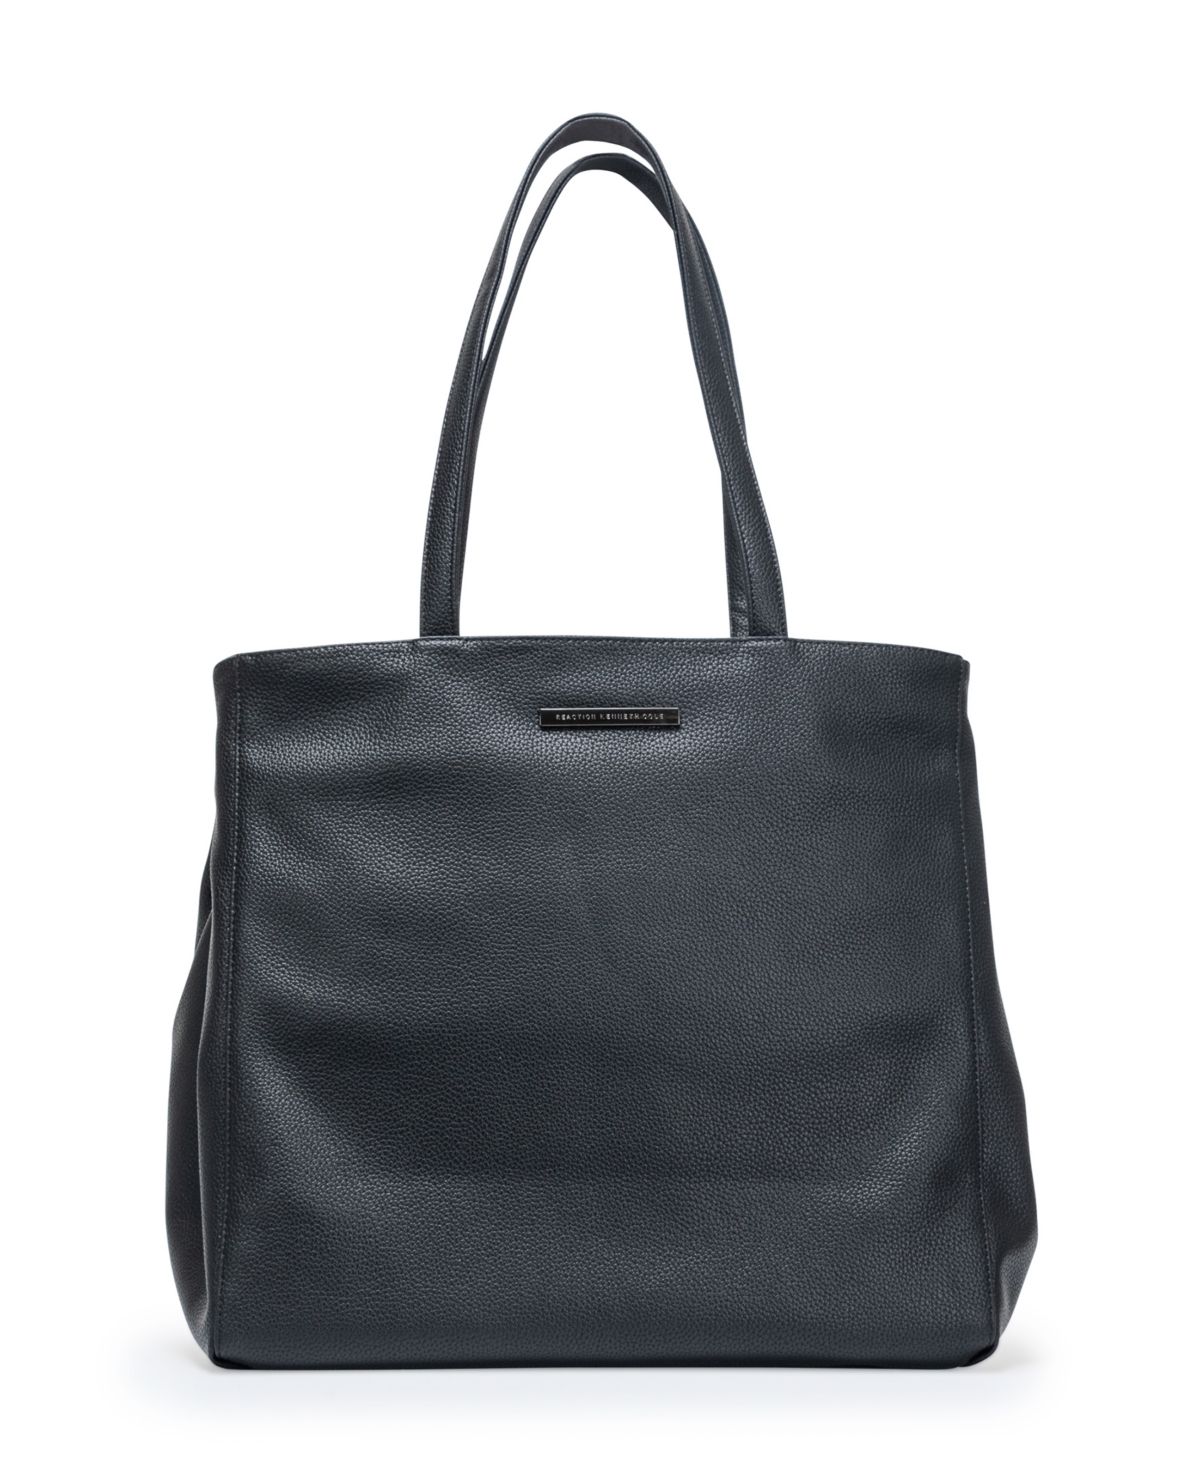 Faux Leather Marley 16" Laptop Tote Bag - Black